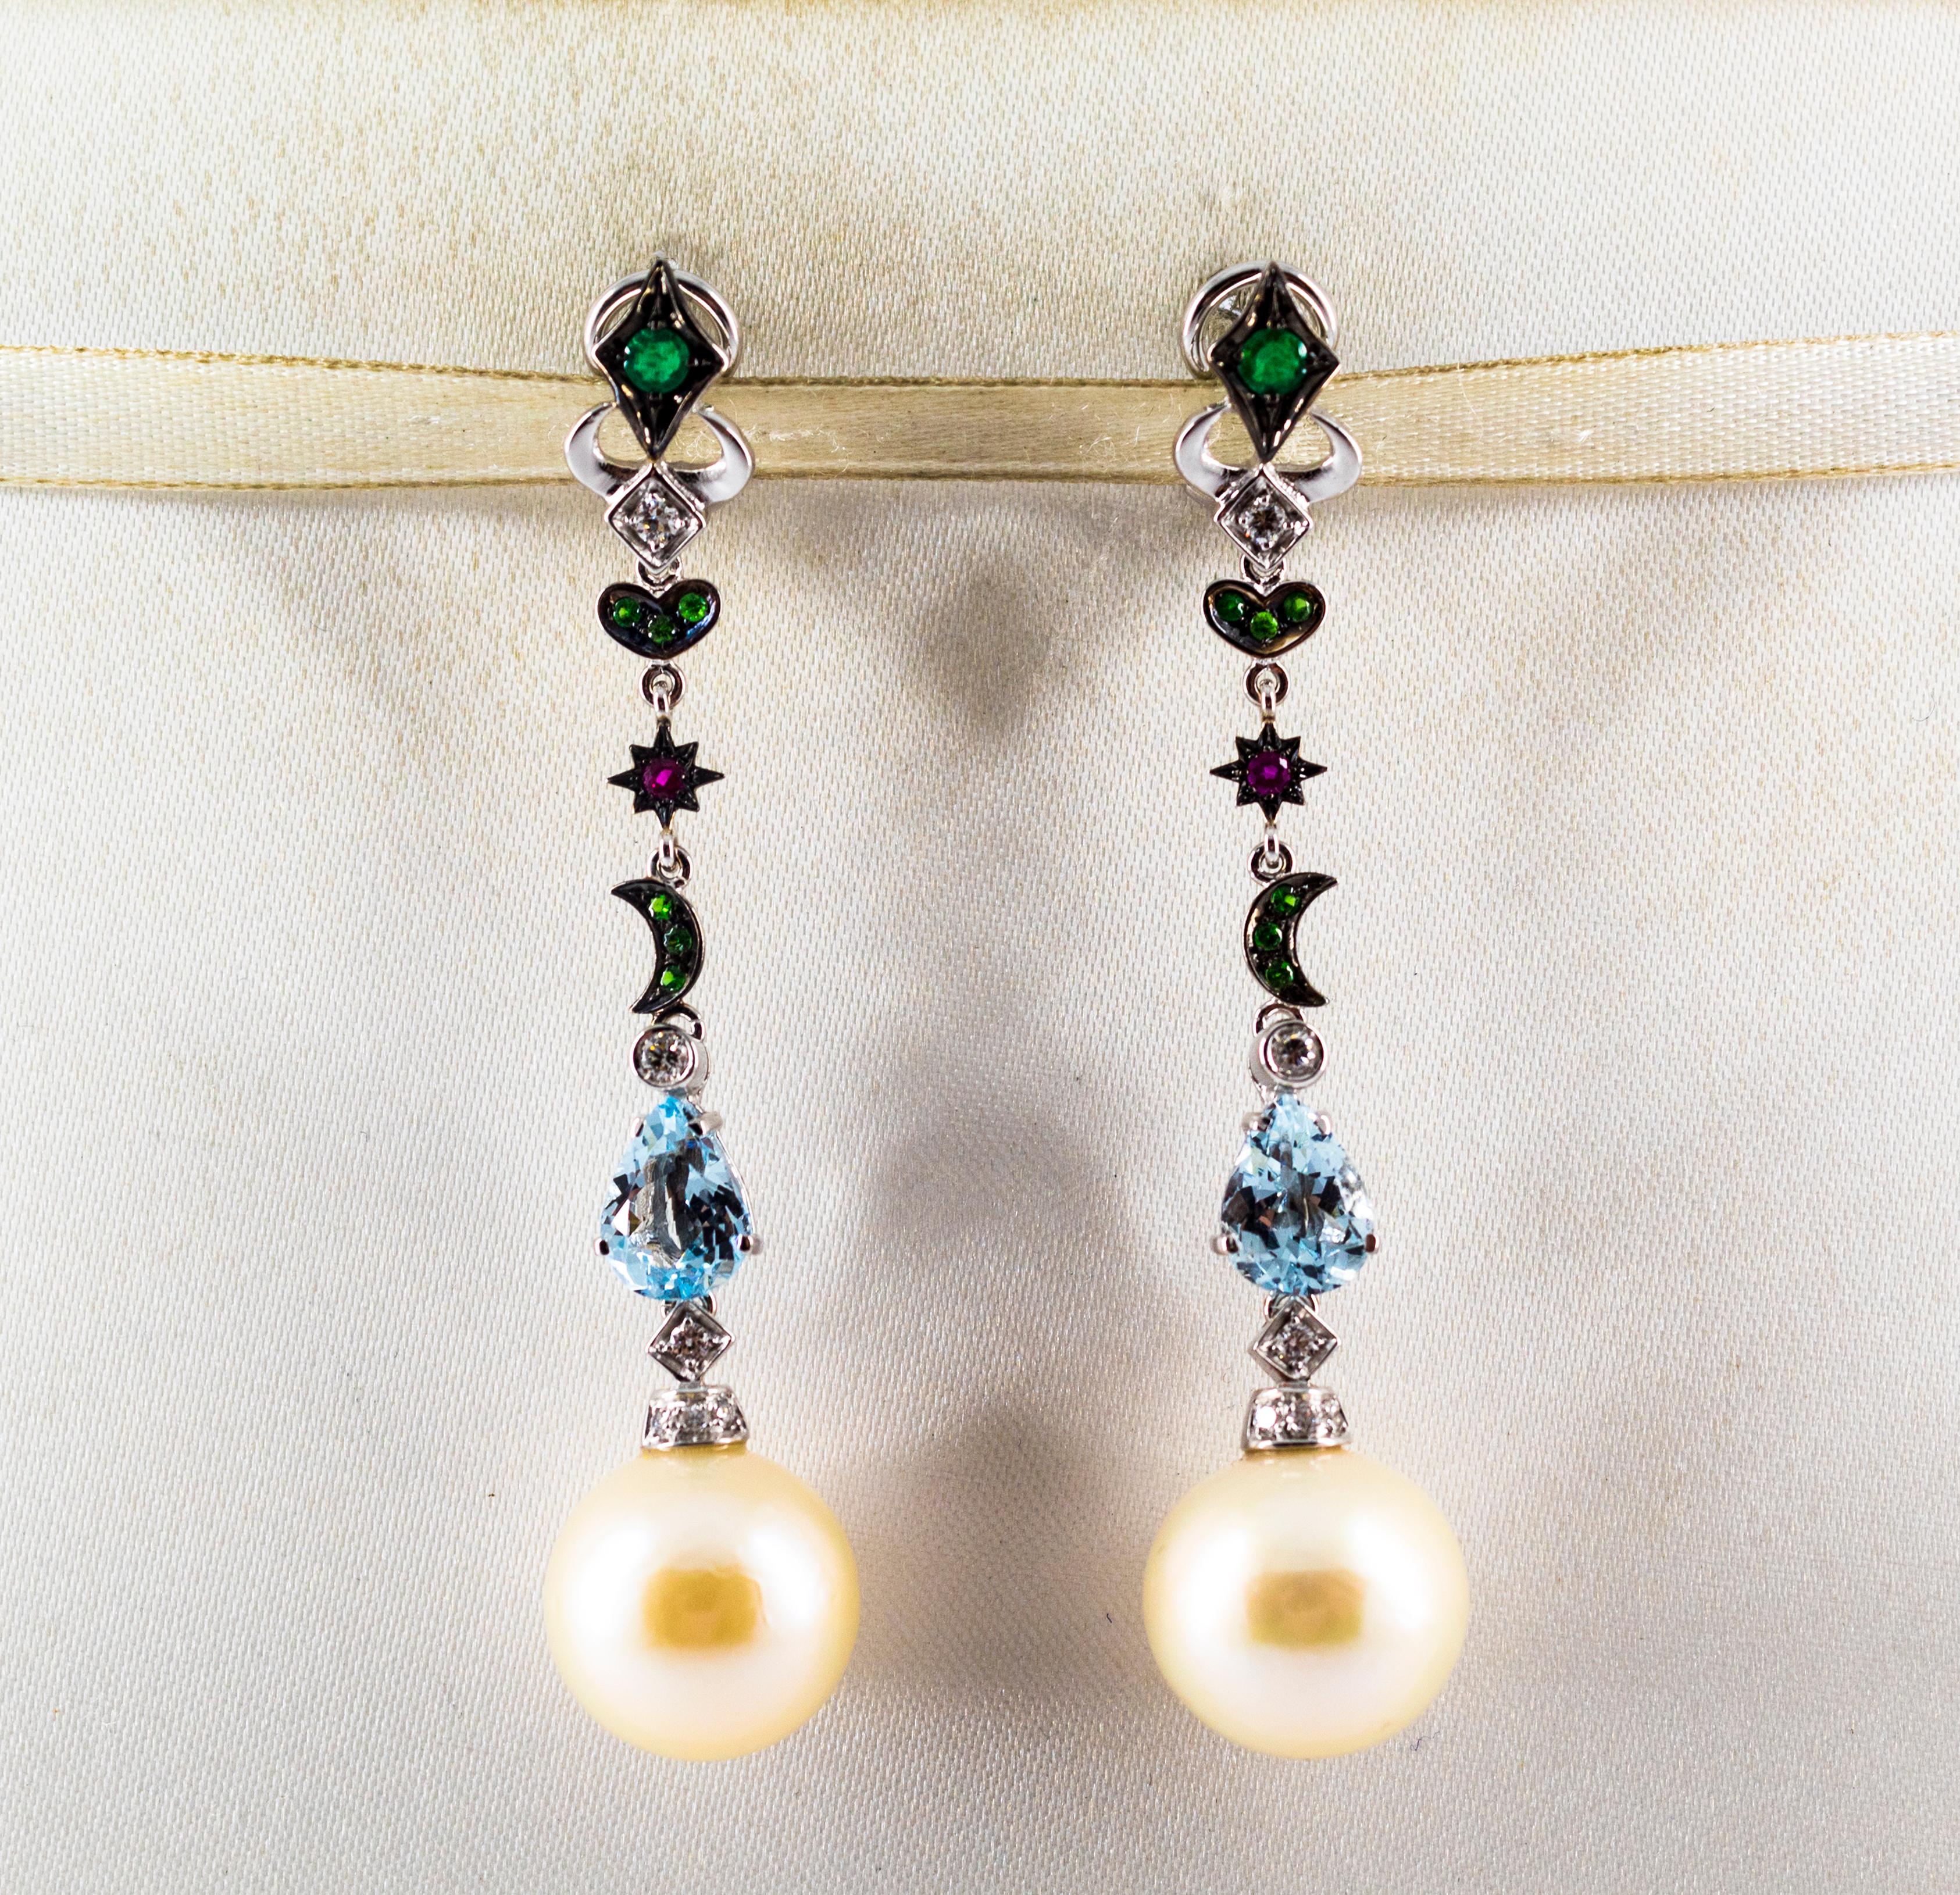 These Clip-On Earrings are made of 18K White Gold.
These Earrings have 0.27 Carats of White Diamonds.
These Earrings have 0.40 Carats of Emeralds.
These Earrings have 0.05 Carats of Rubies.
These Earrings have 2.20 Carats of Aquamarine.
These